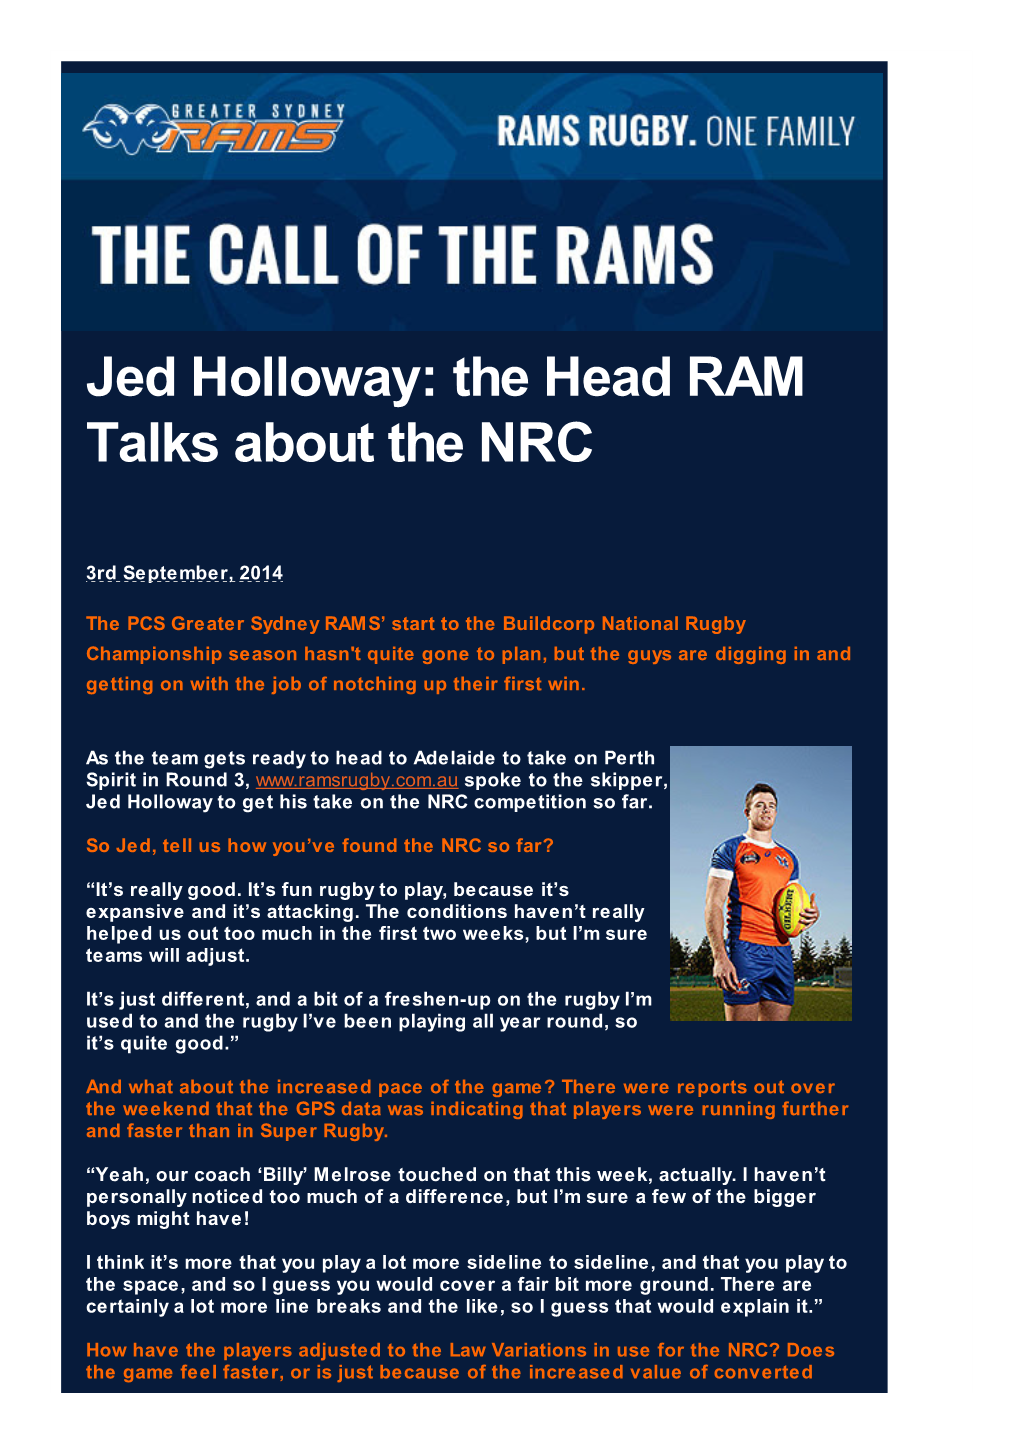 Jed Holloway: the Head RAM Talks About the NRC